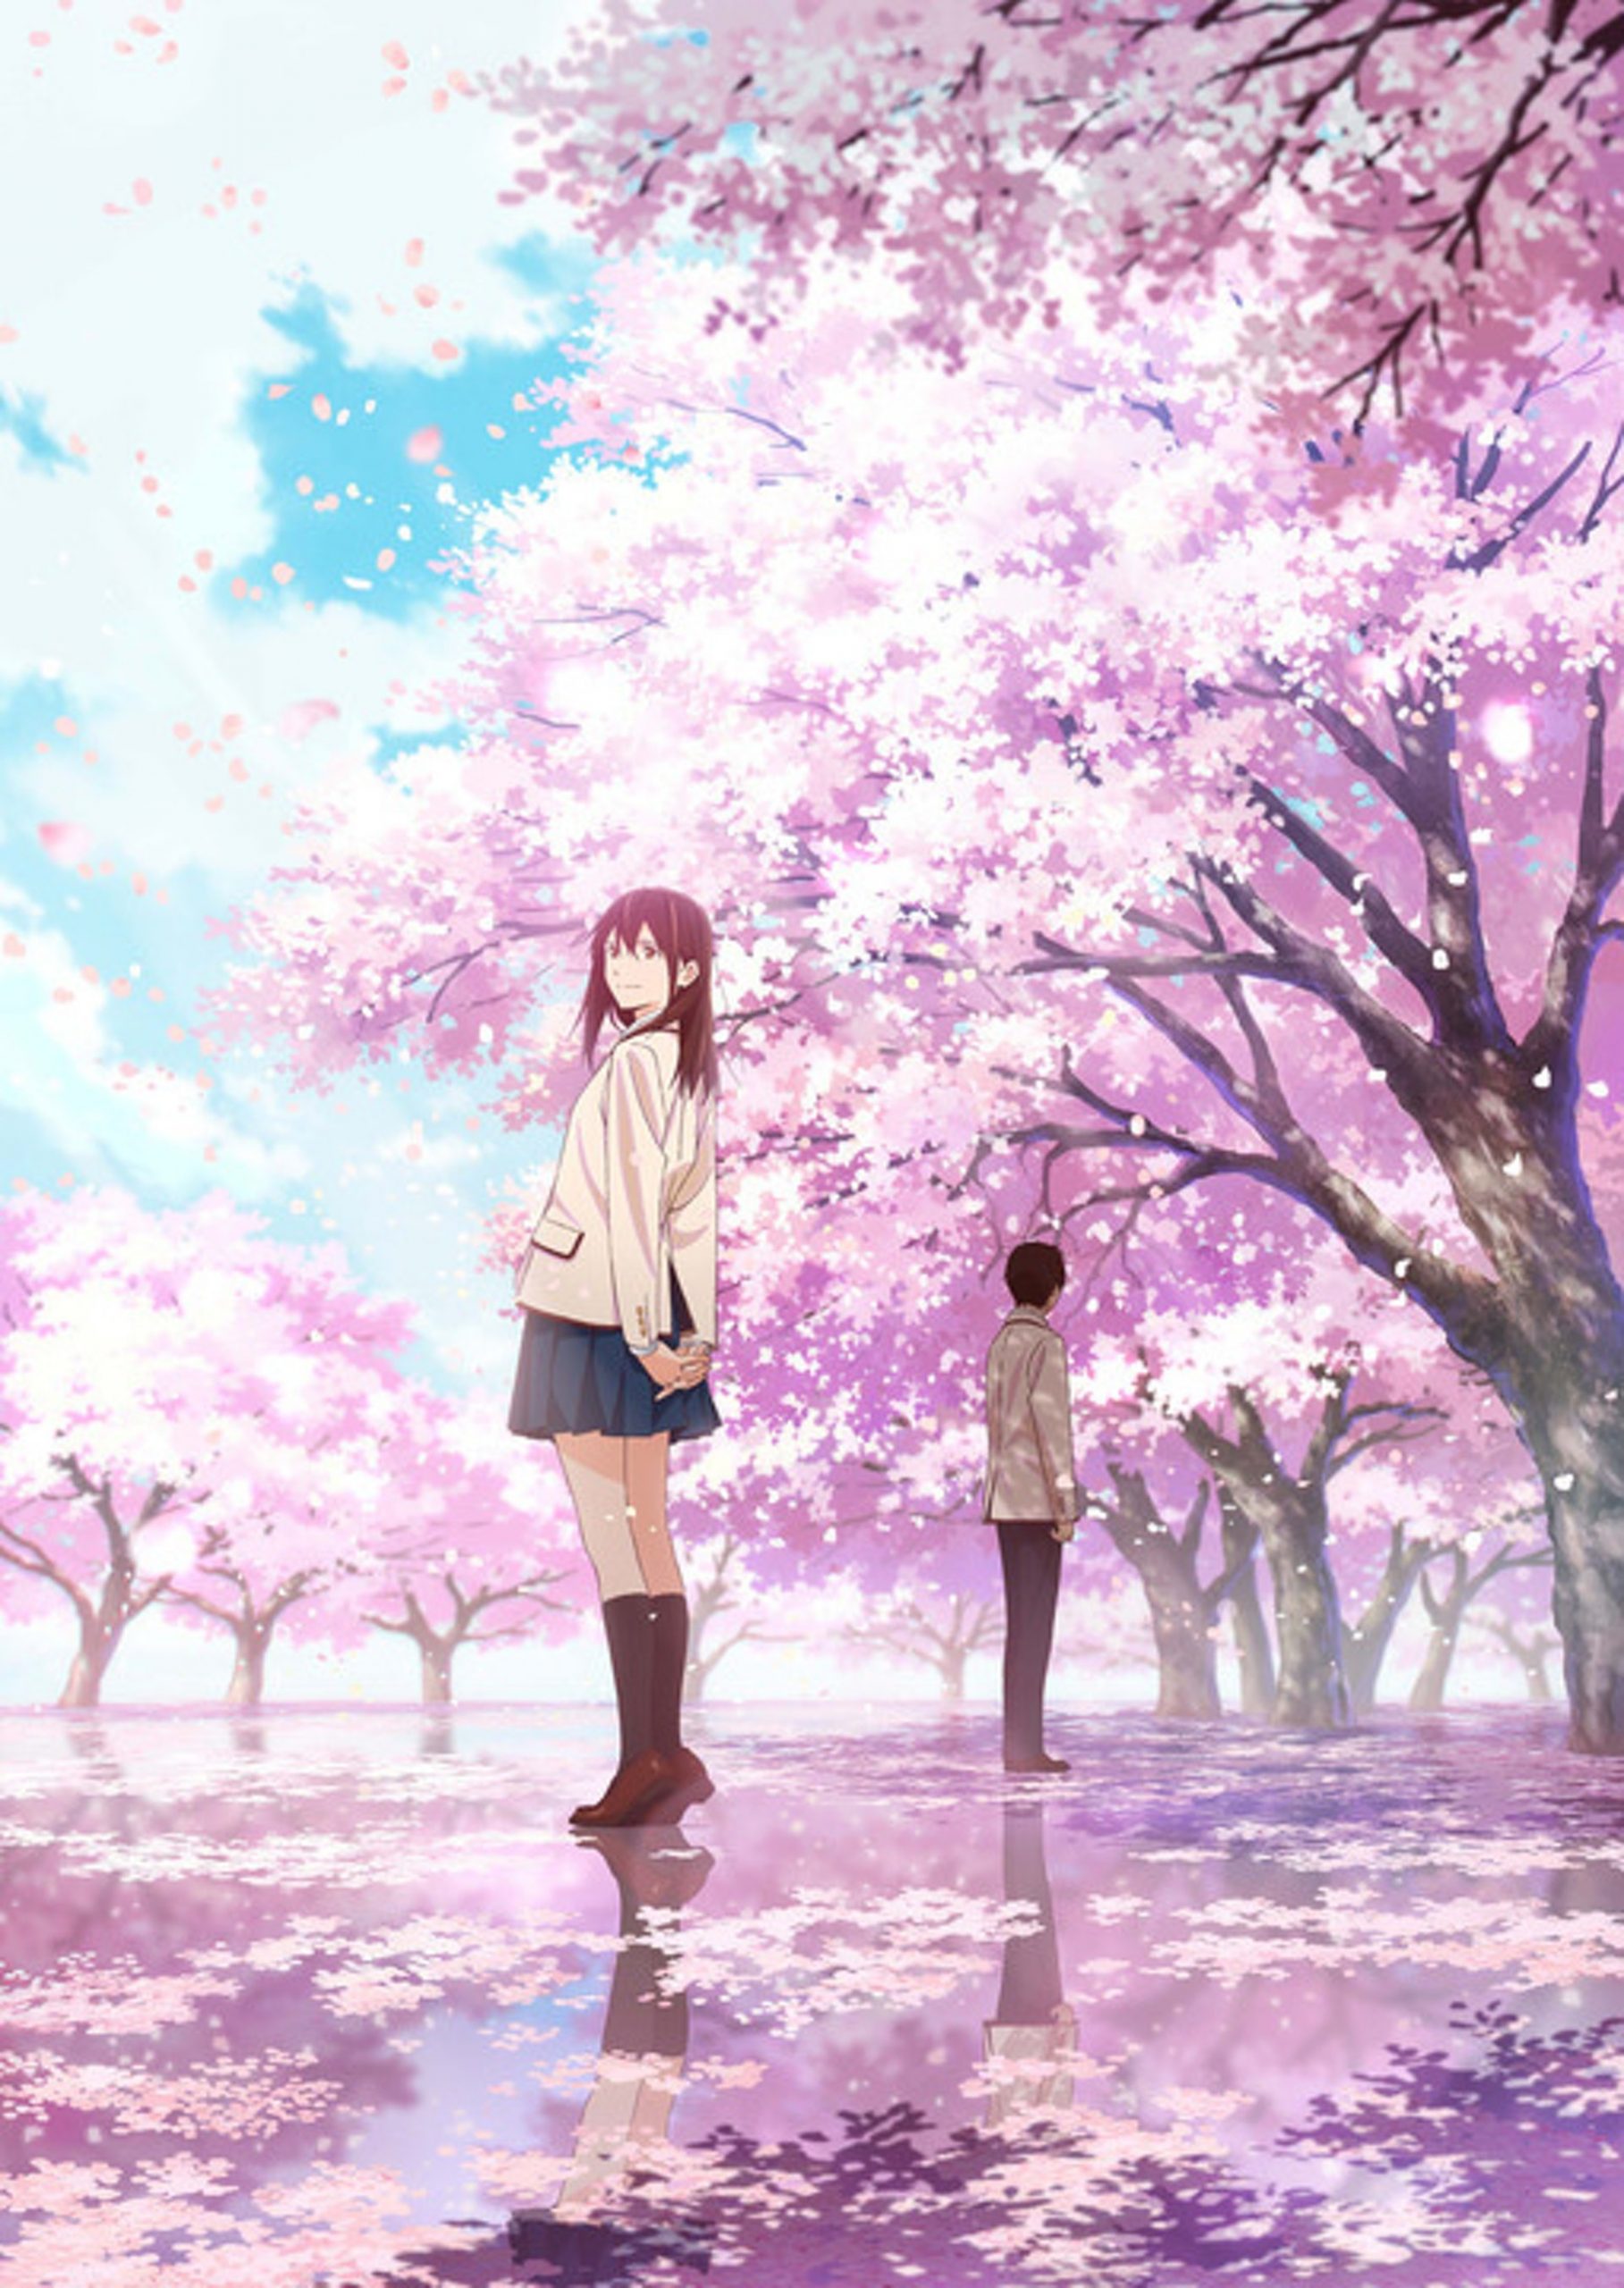 50 Best Romance Anime Of All Time 2023  Love Stories to Make You Laugh   Cry